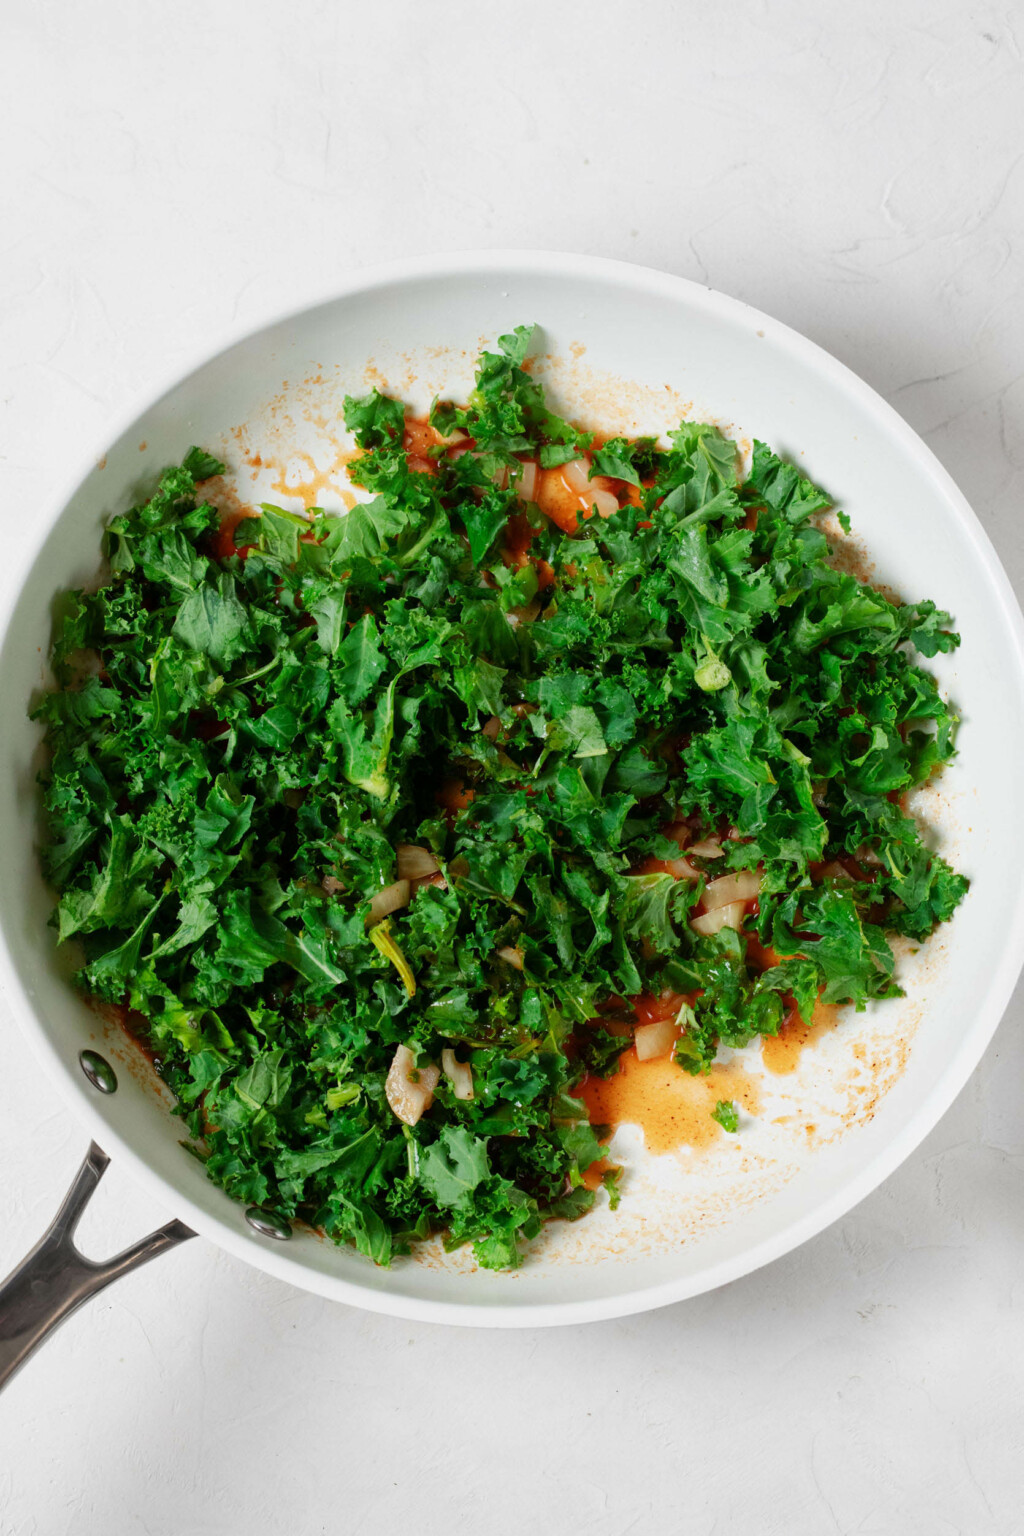 A white skillet is being used to sauté bright green, chopped curly kale.